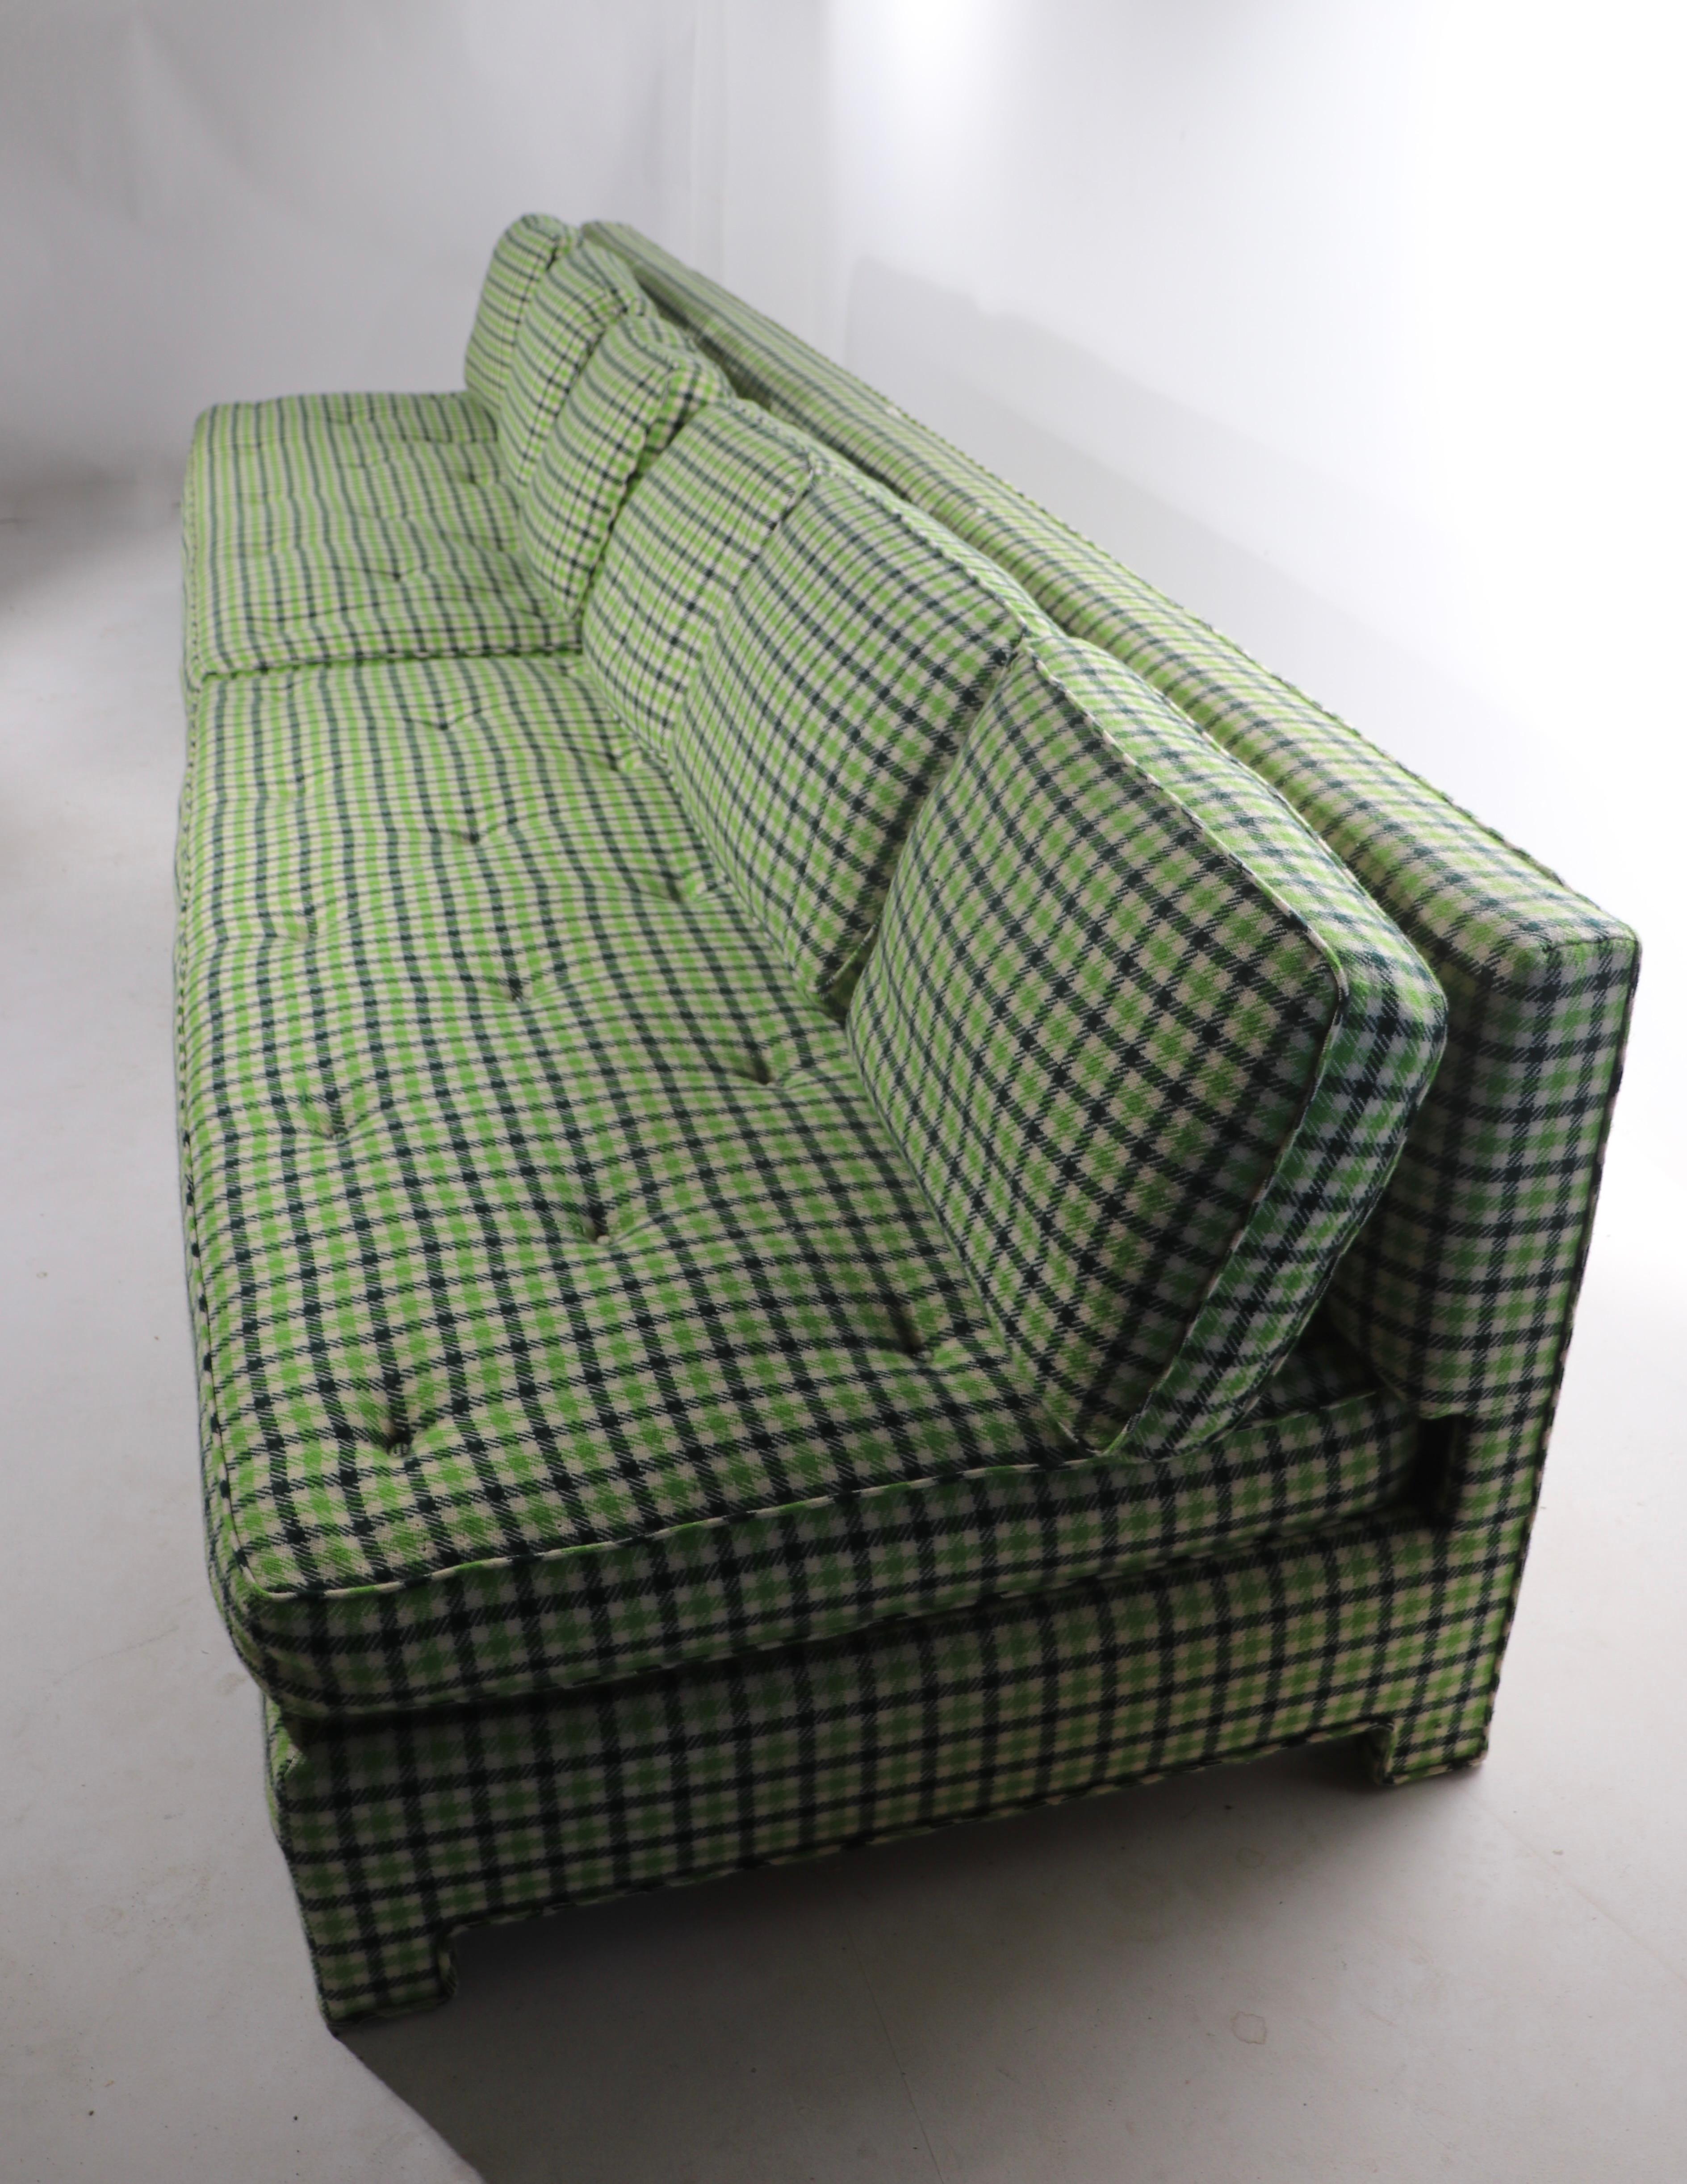 70s plaid couch